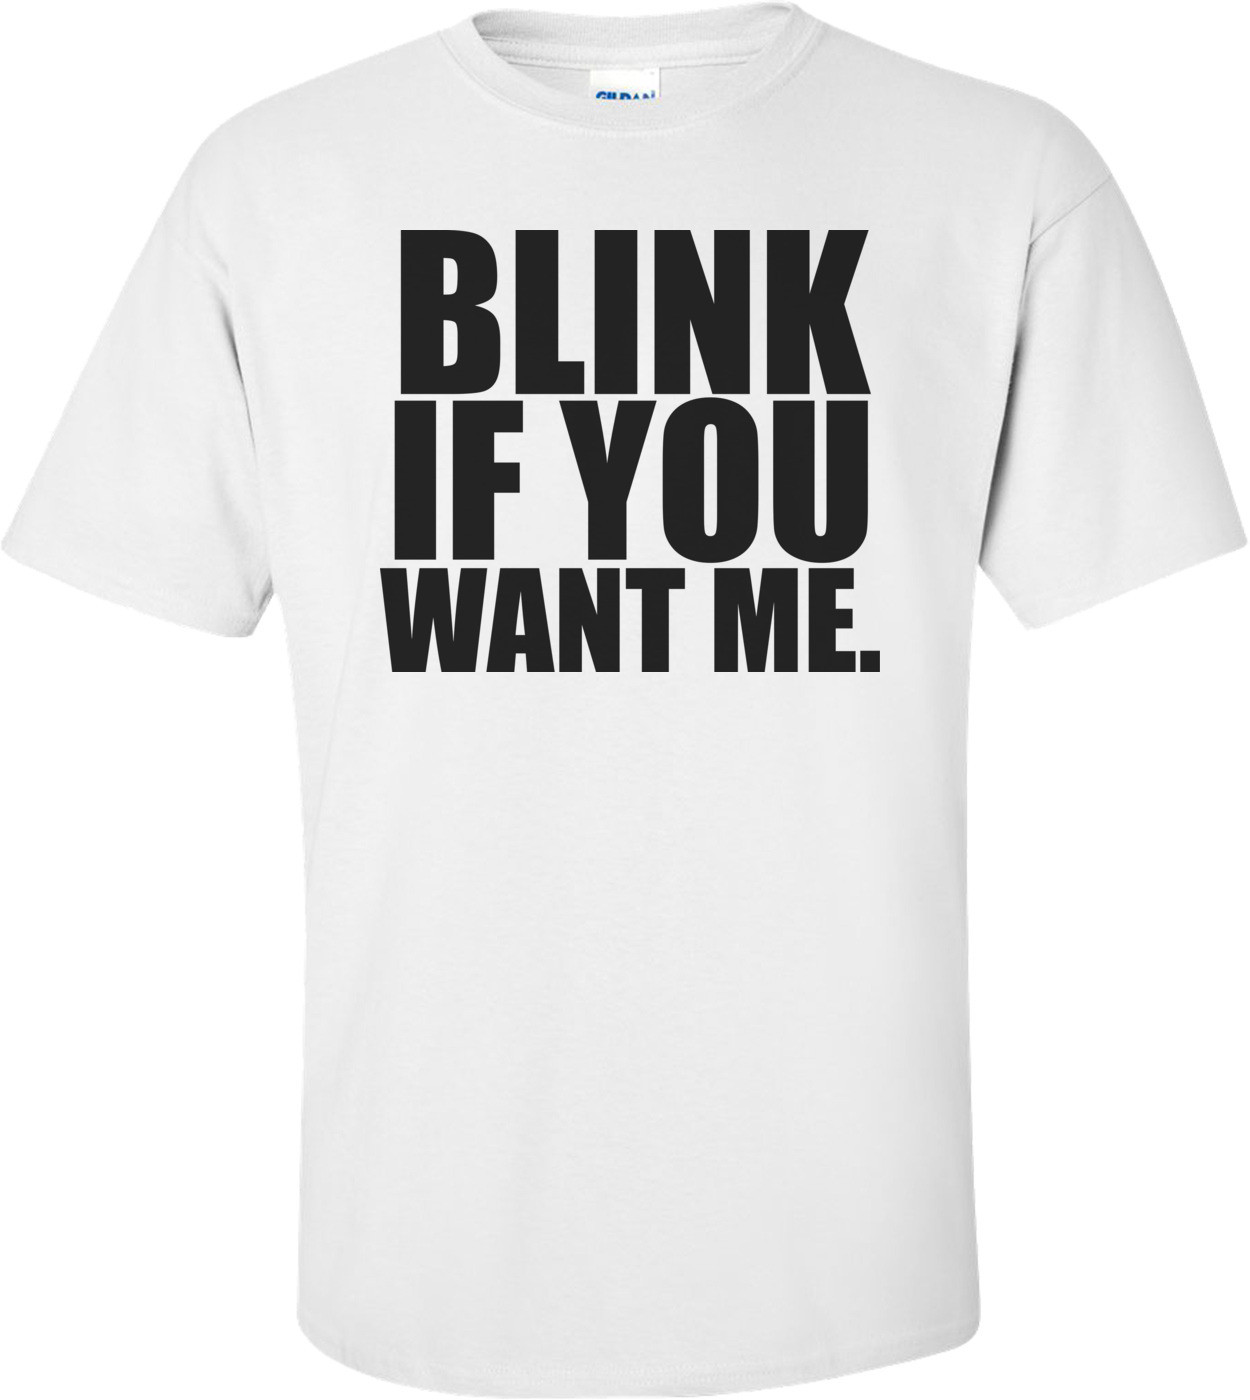 Blink If You Want Me Shirt